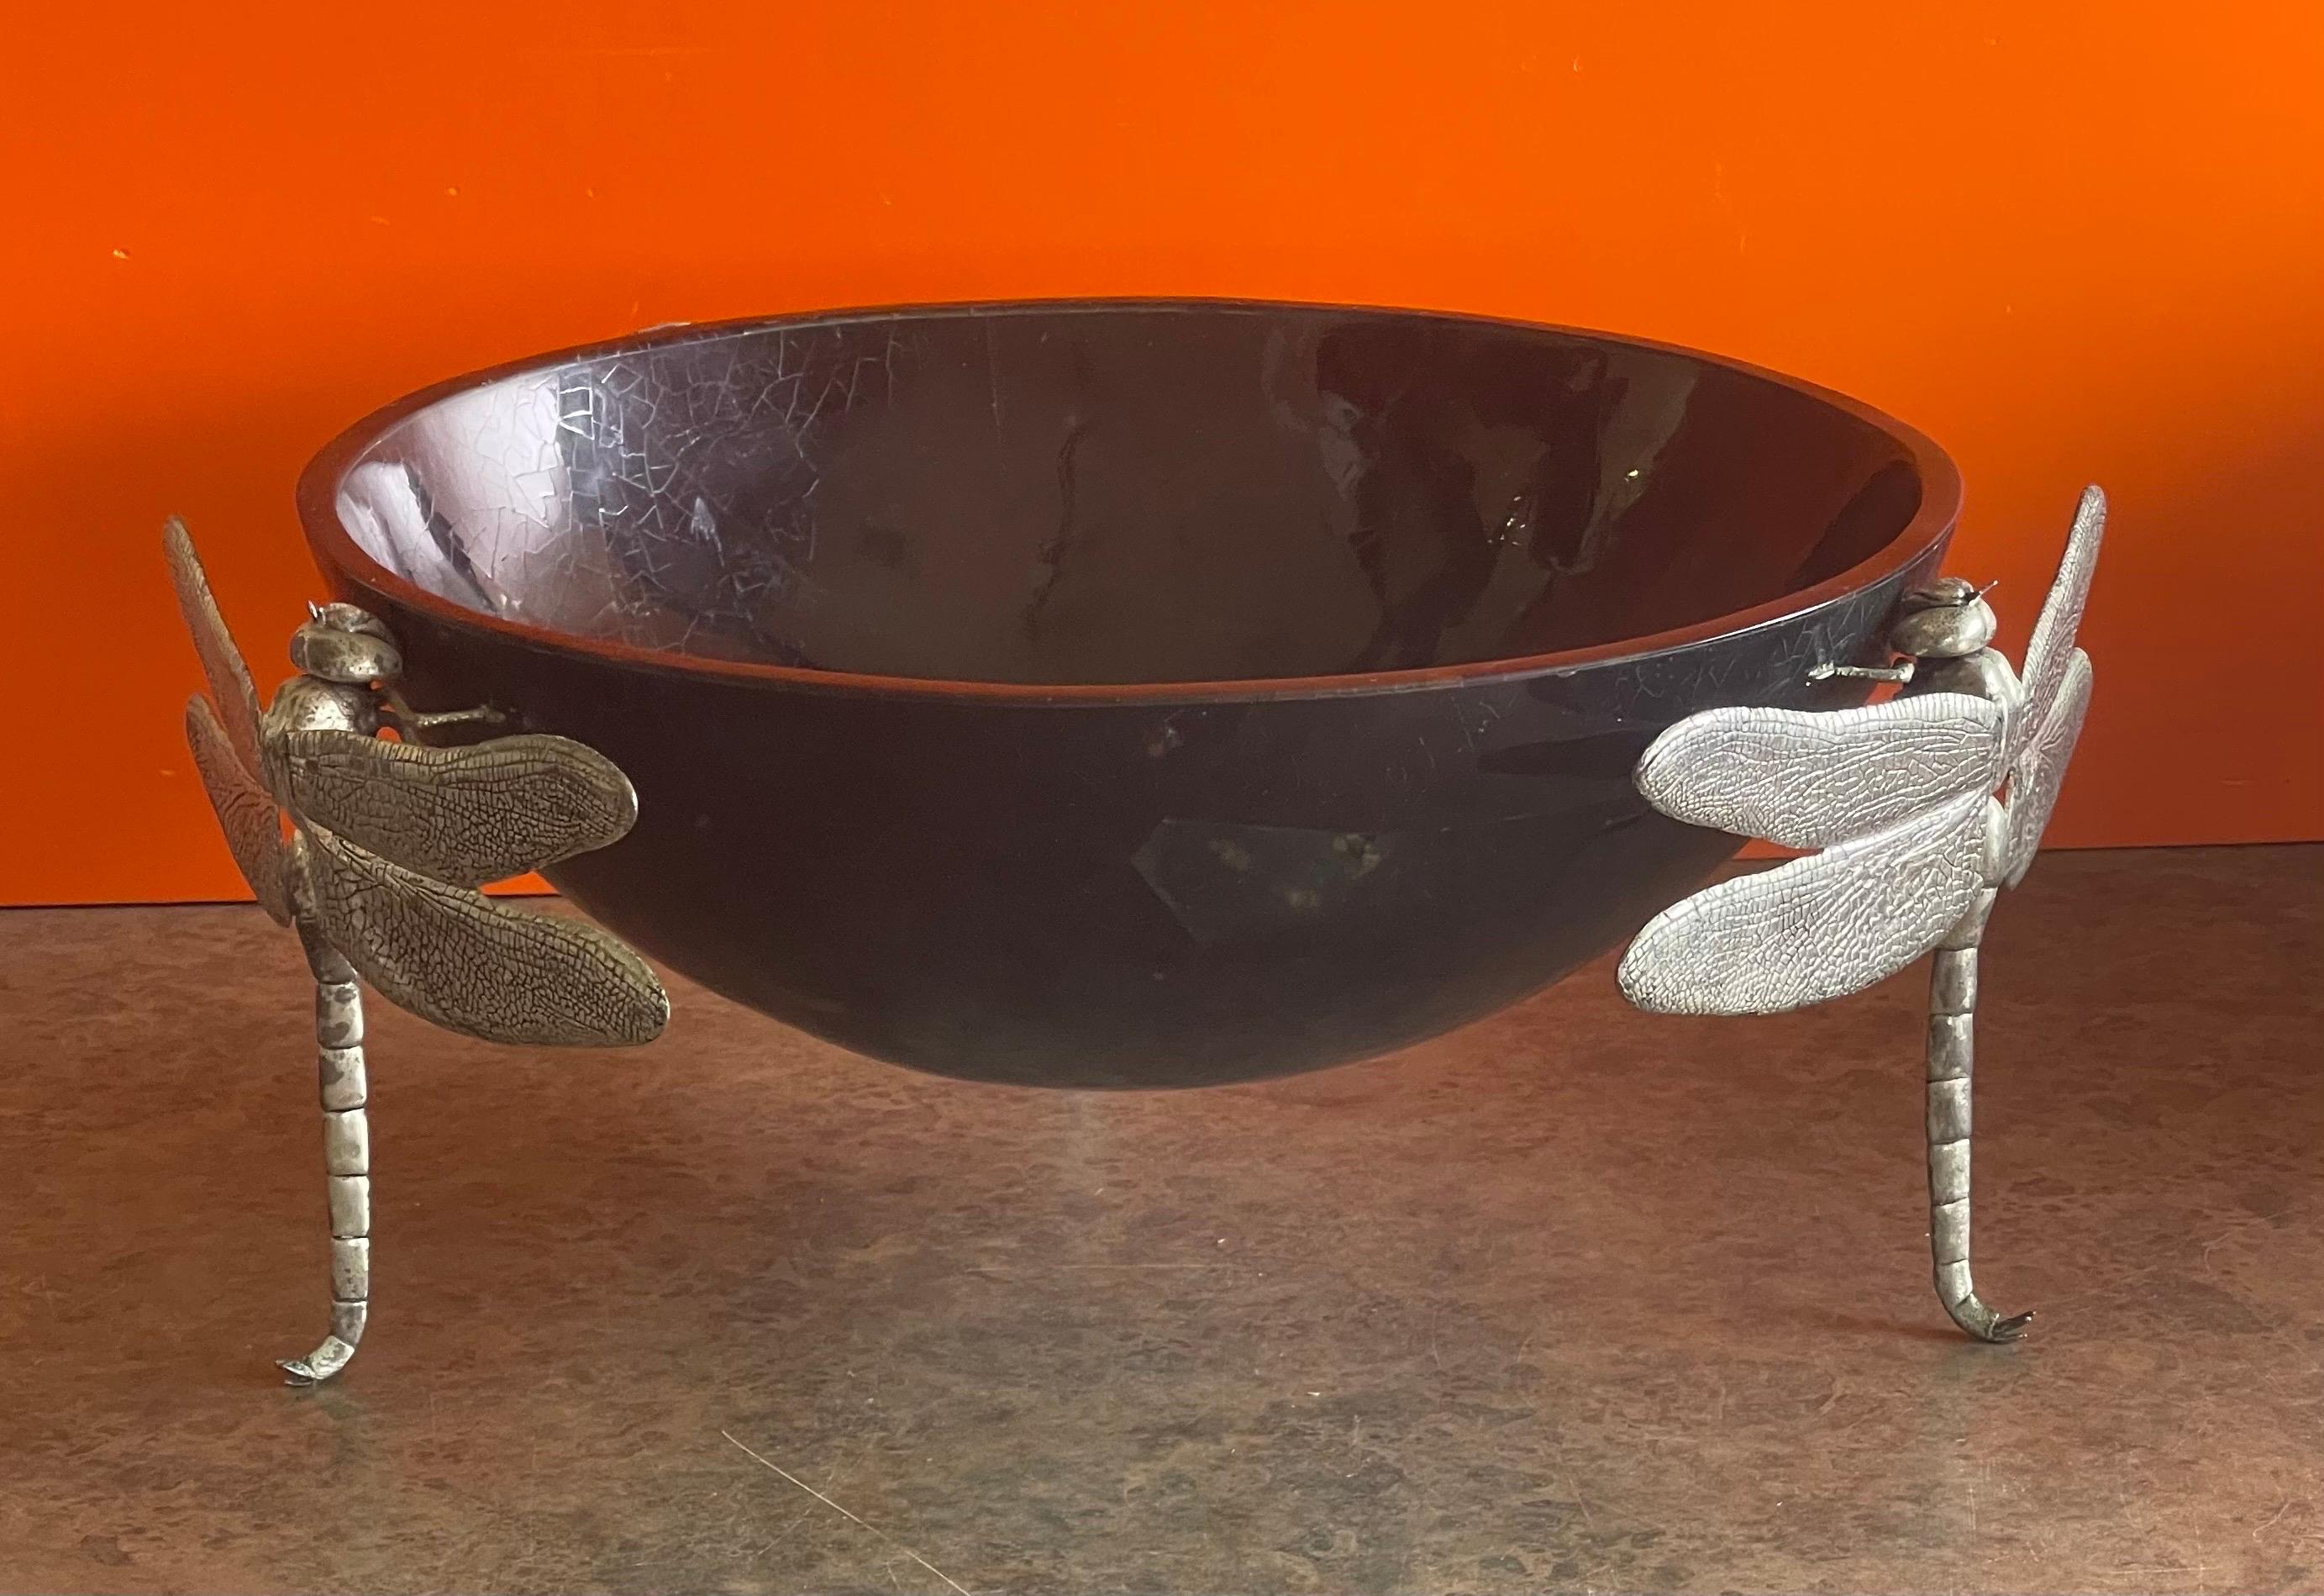 20th Century Large Black Pen Shell Centerpiece Bowl with Dragonfly Feet